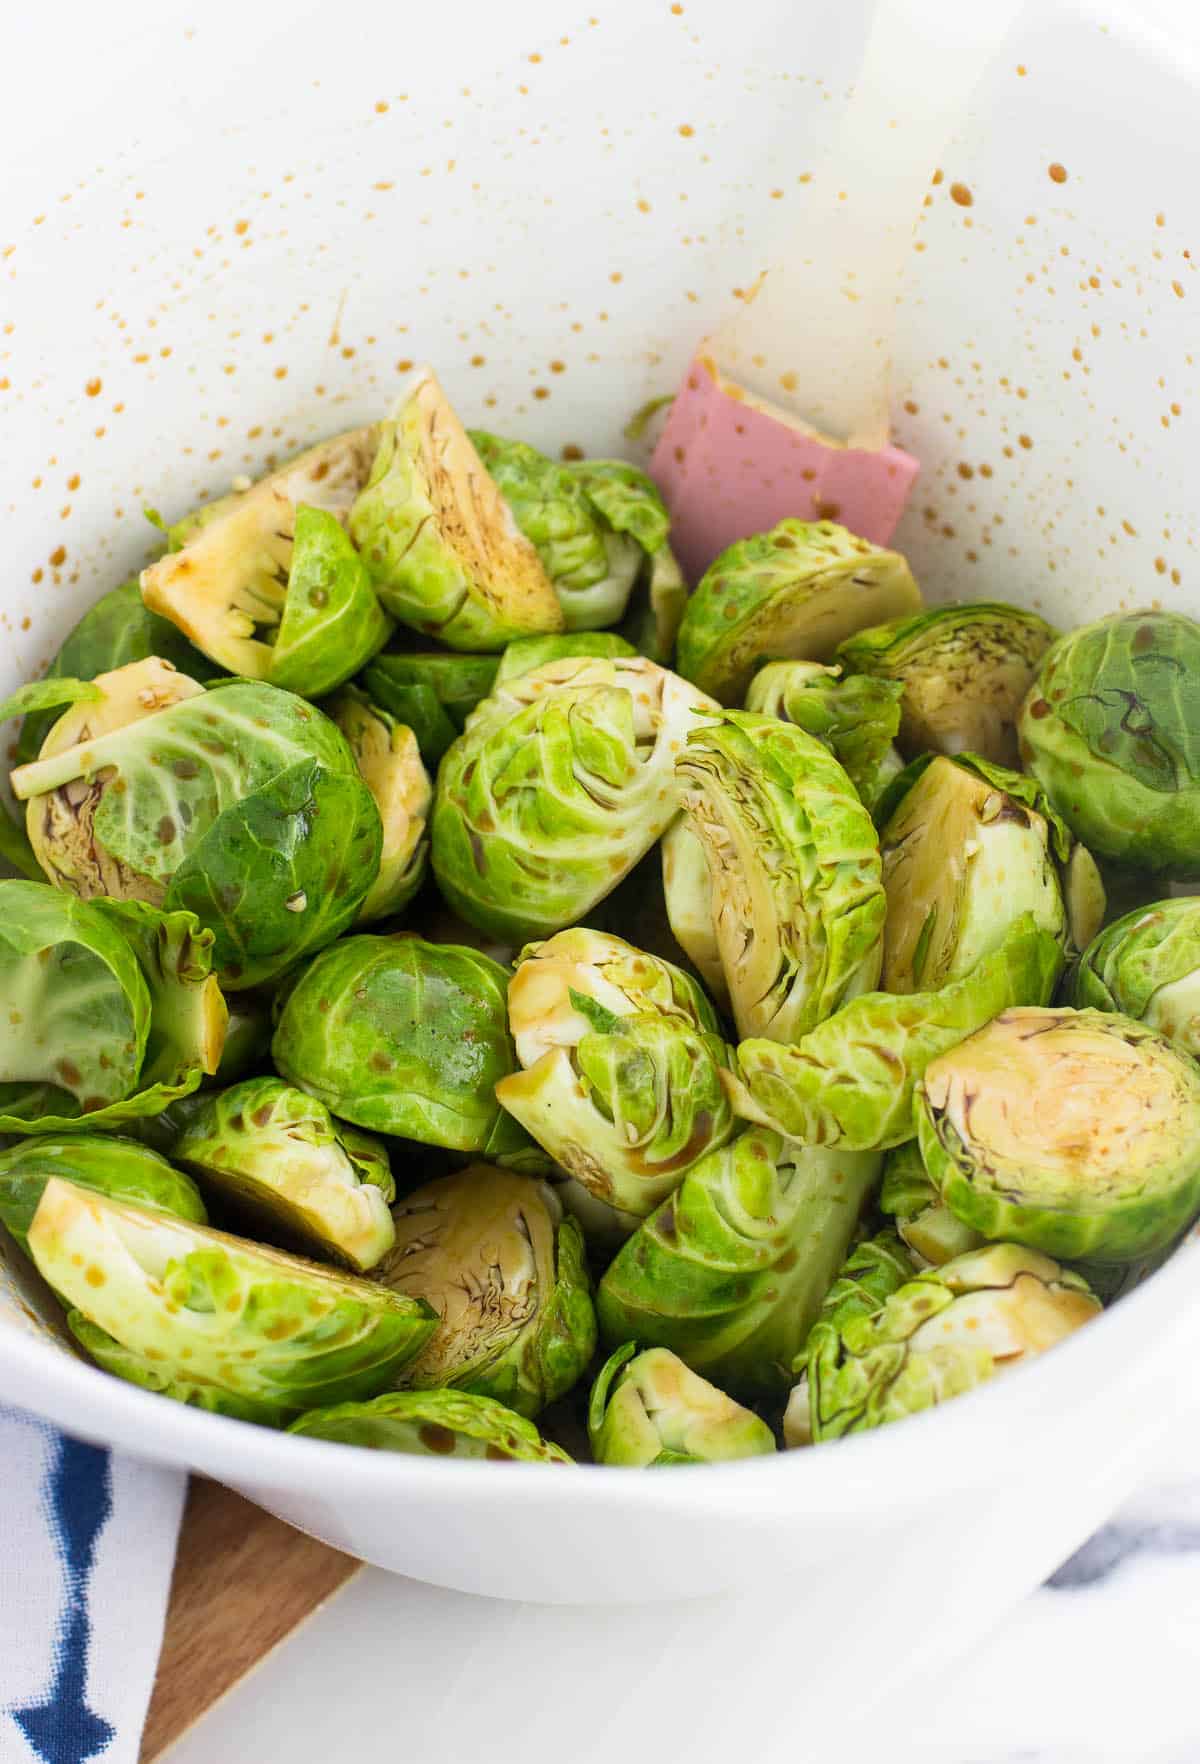 Halved brussels sprouts tossed in honey and other ingredients in a large plastic mixing bowl with a spatula